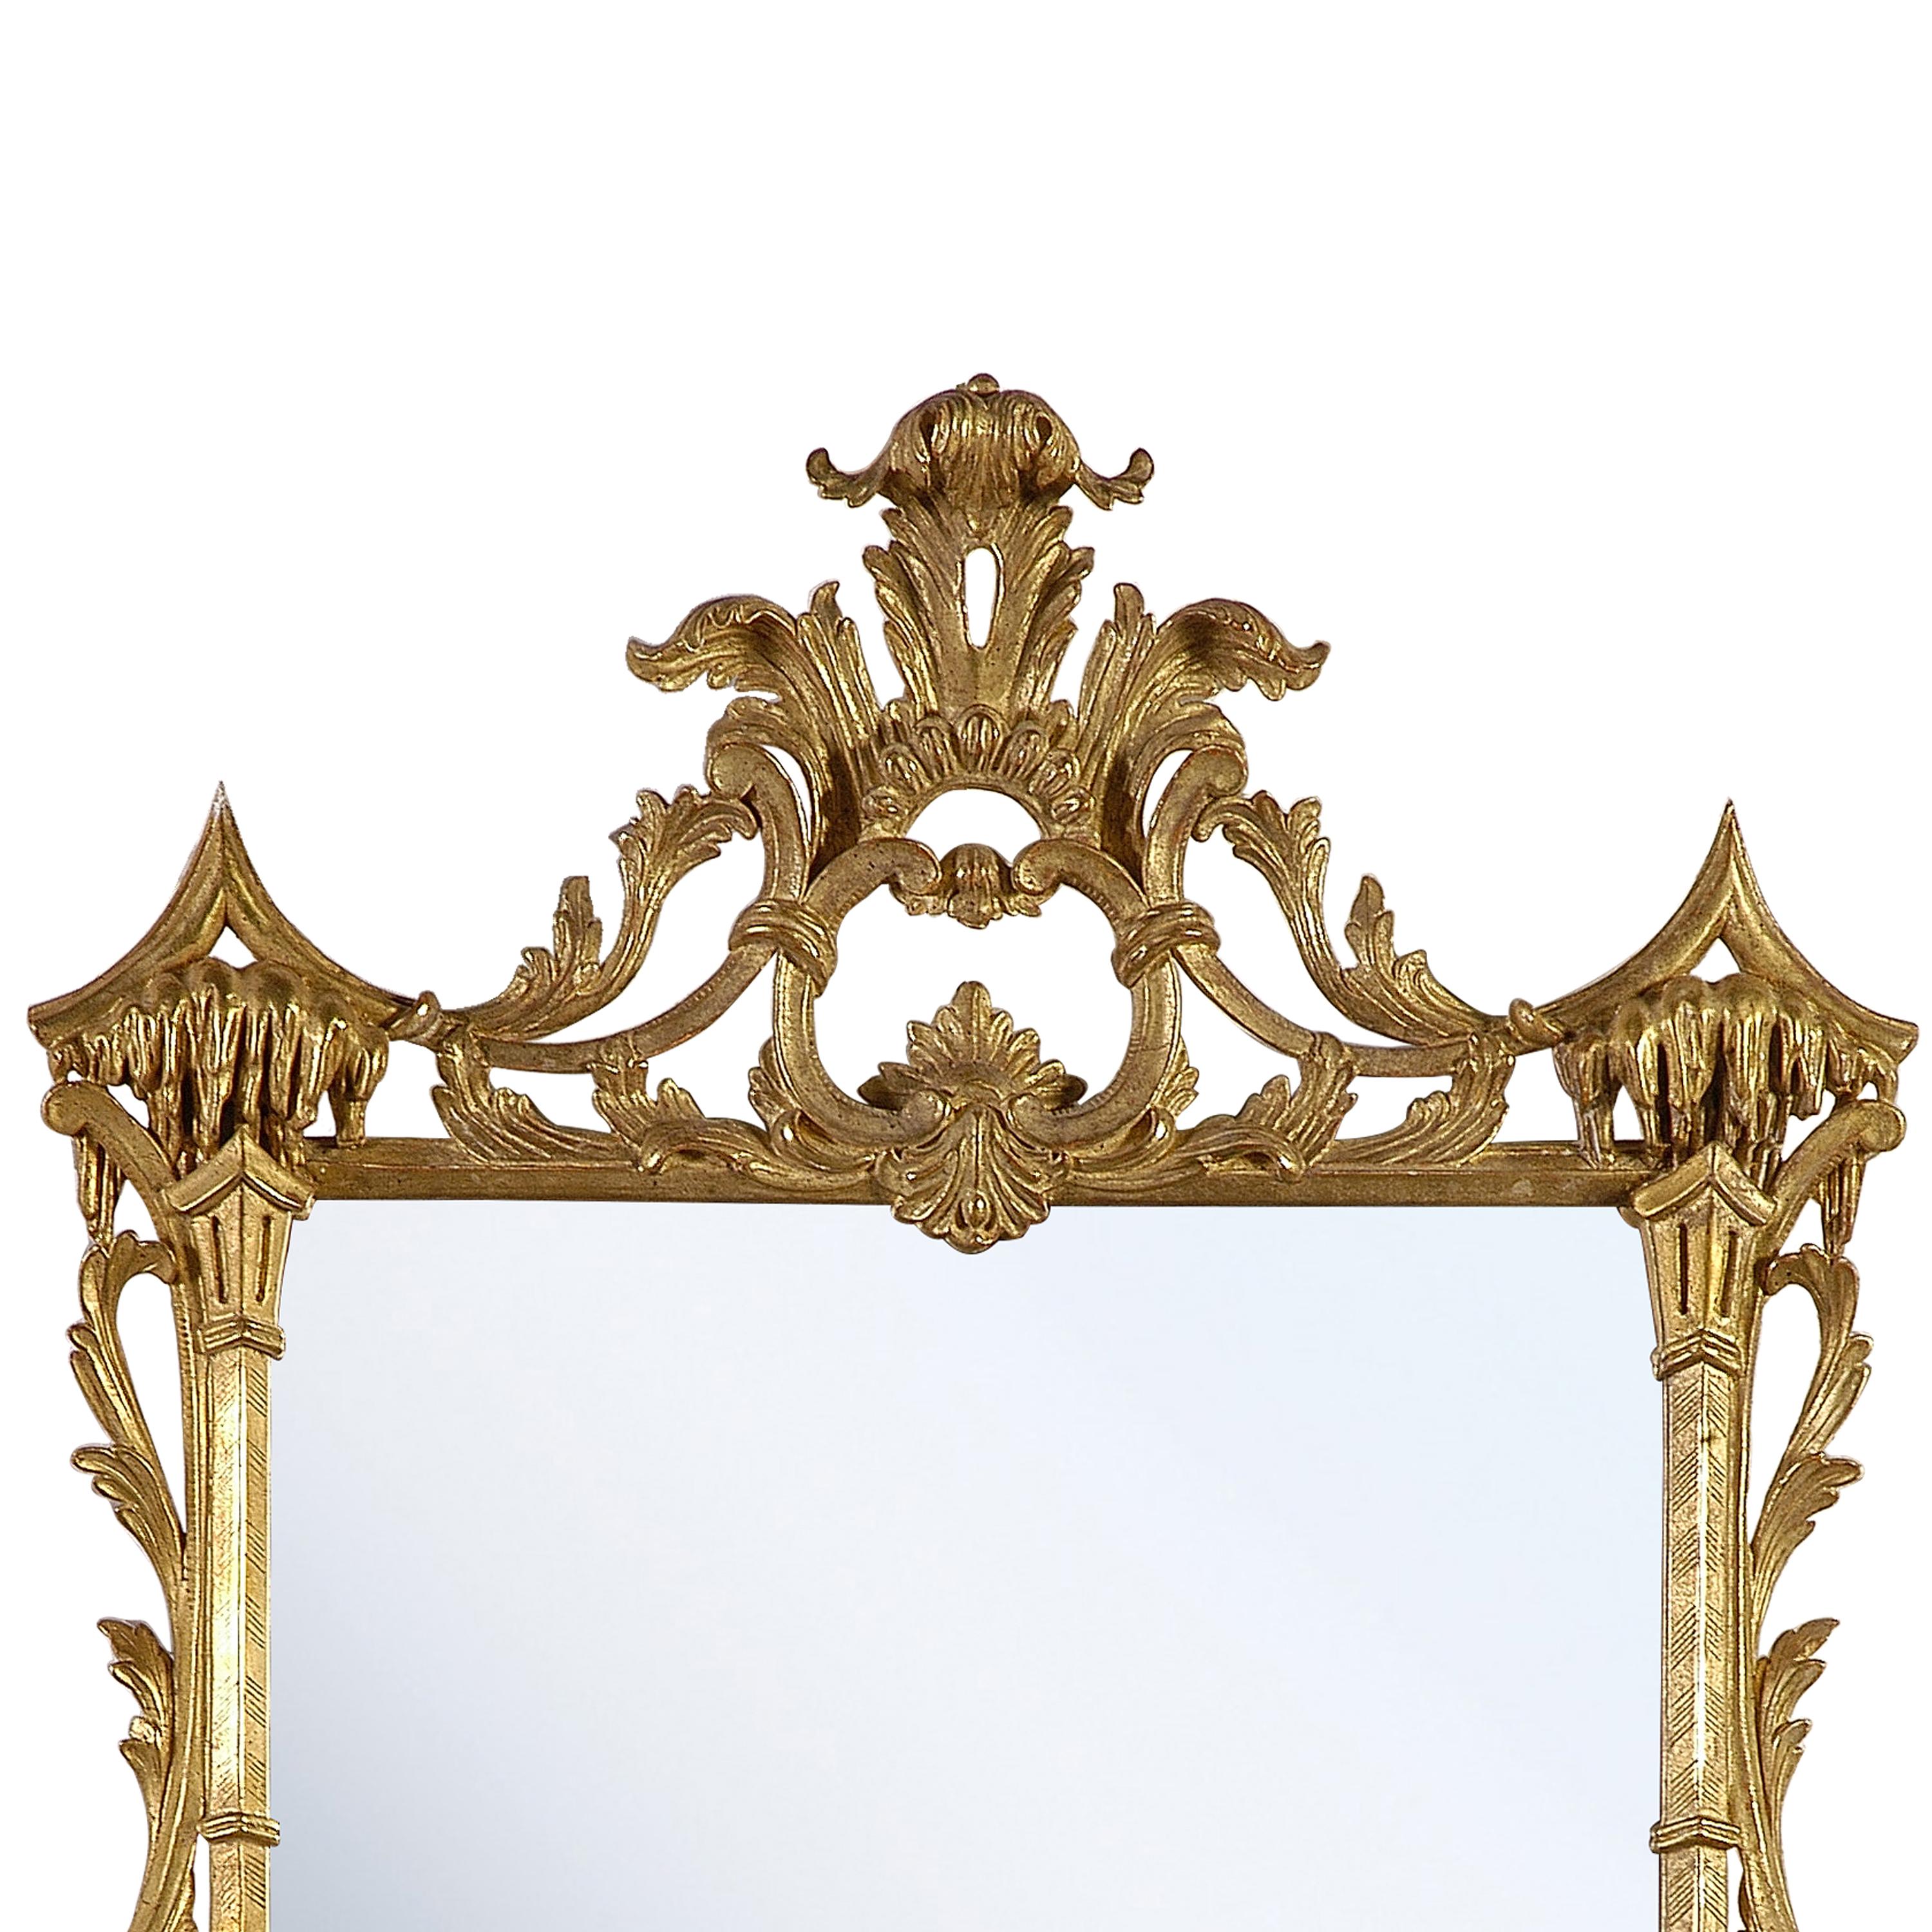 Neoclassical rectangular handcrafted mirror. Hand carved wooden structure with gold foil finished. Spain, 1970.